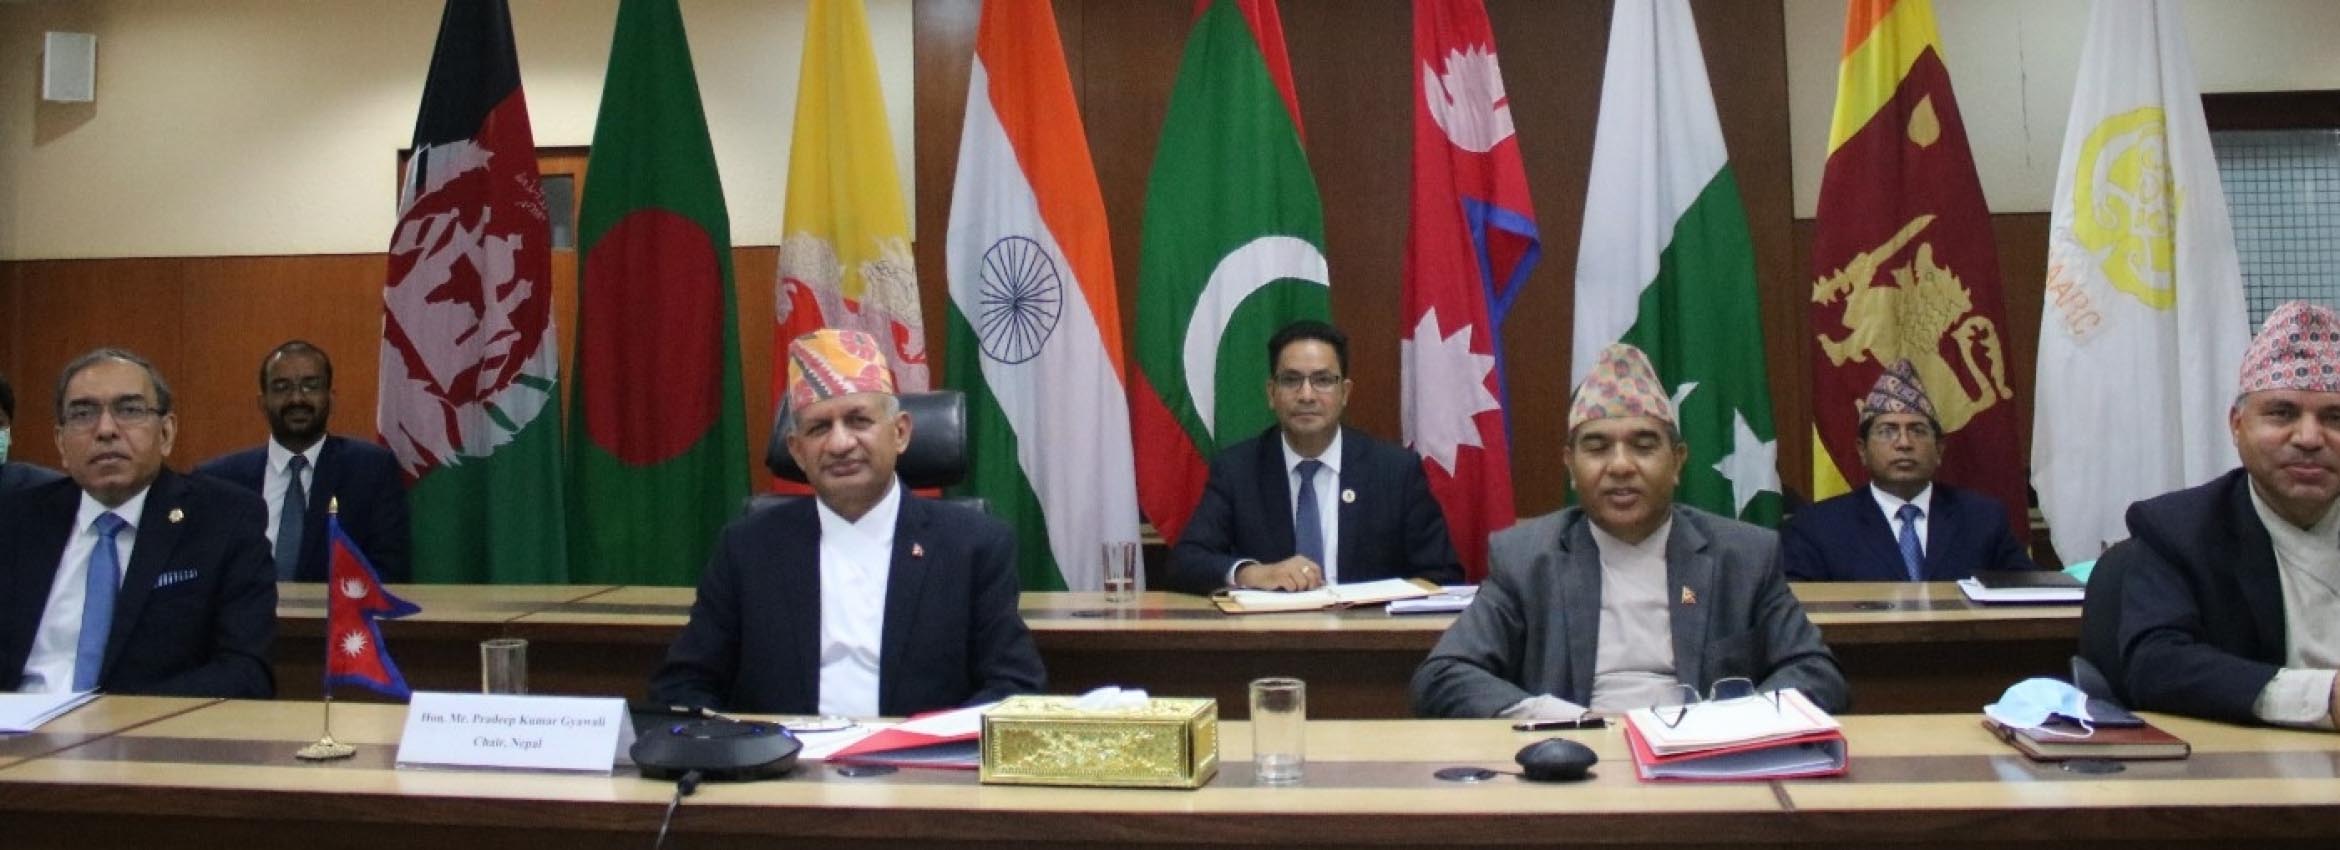 Press Release- Informal Meeting of the SAARC Council of Ministers, 24 September 2020